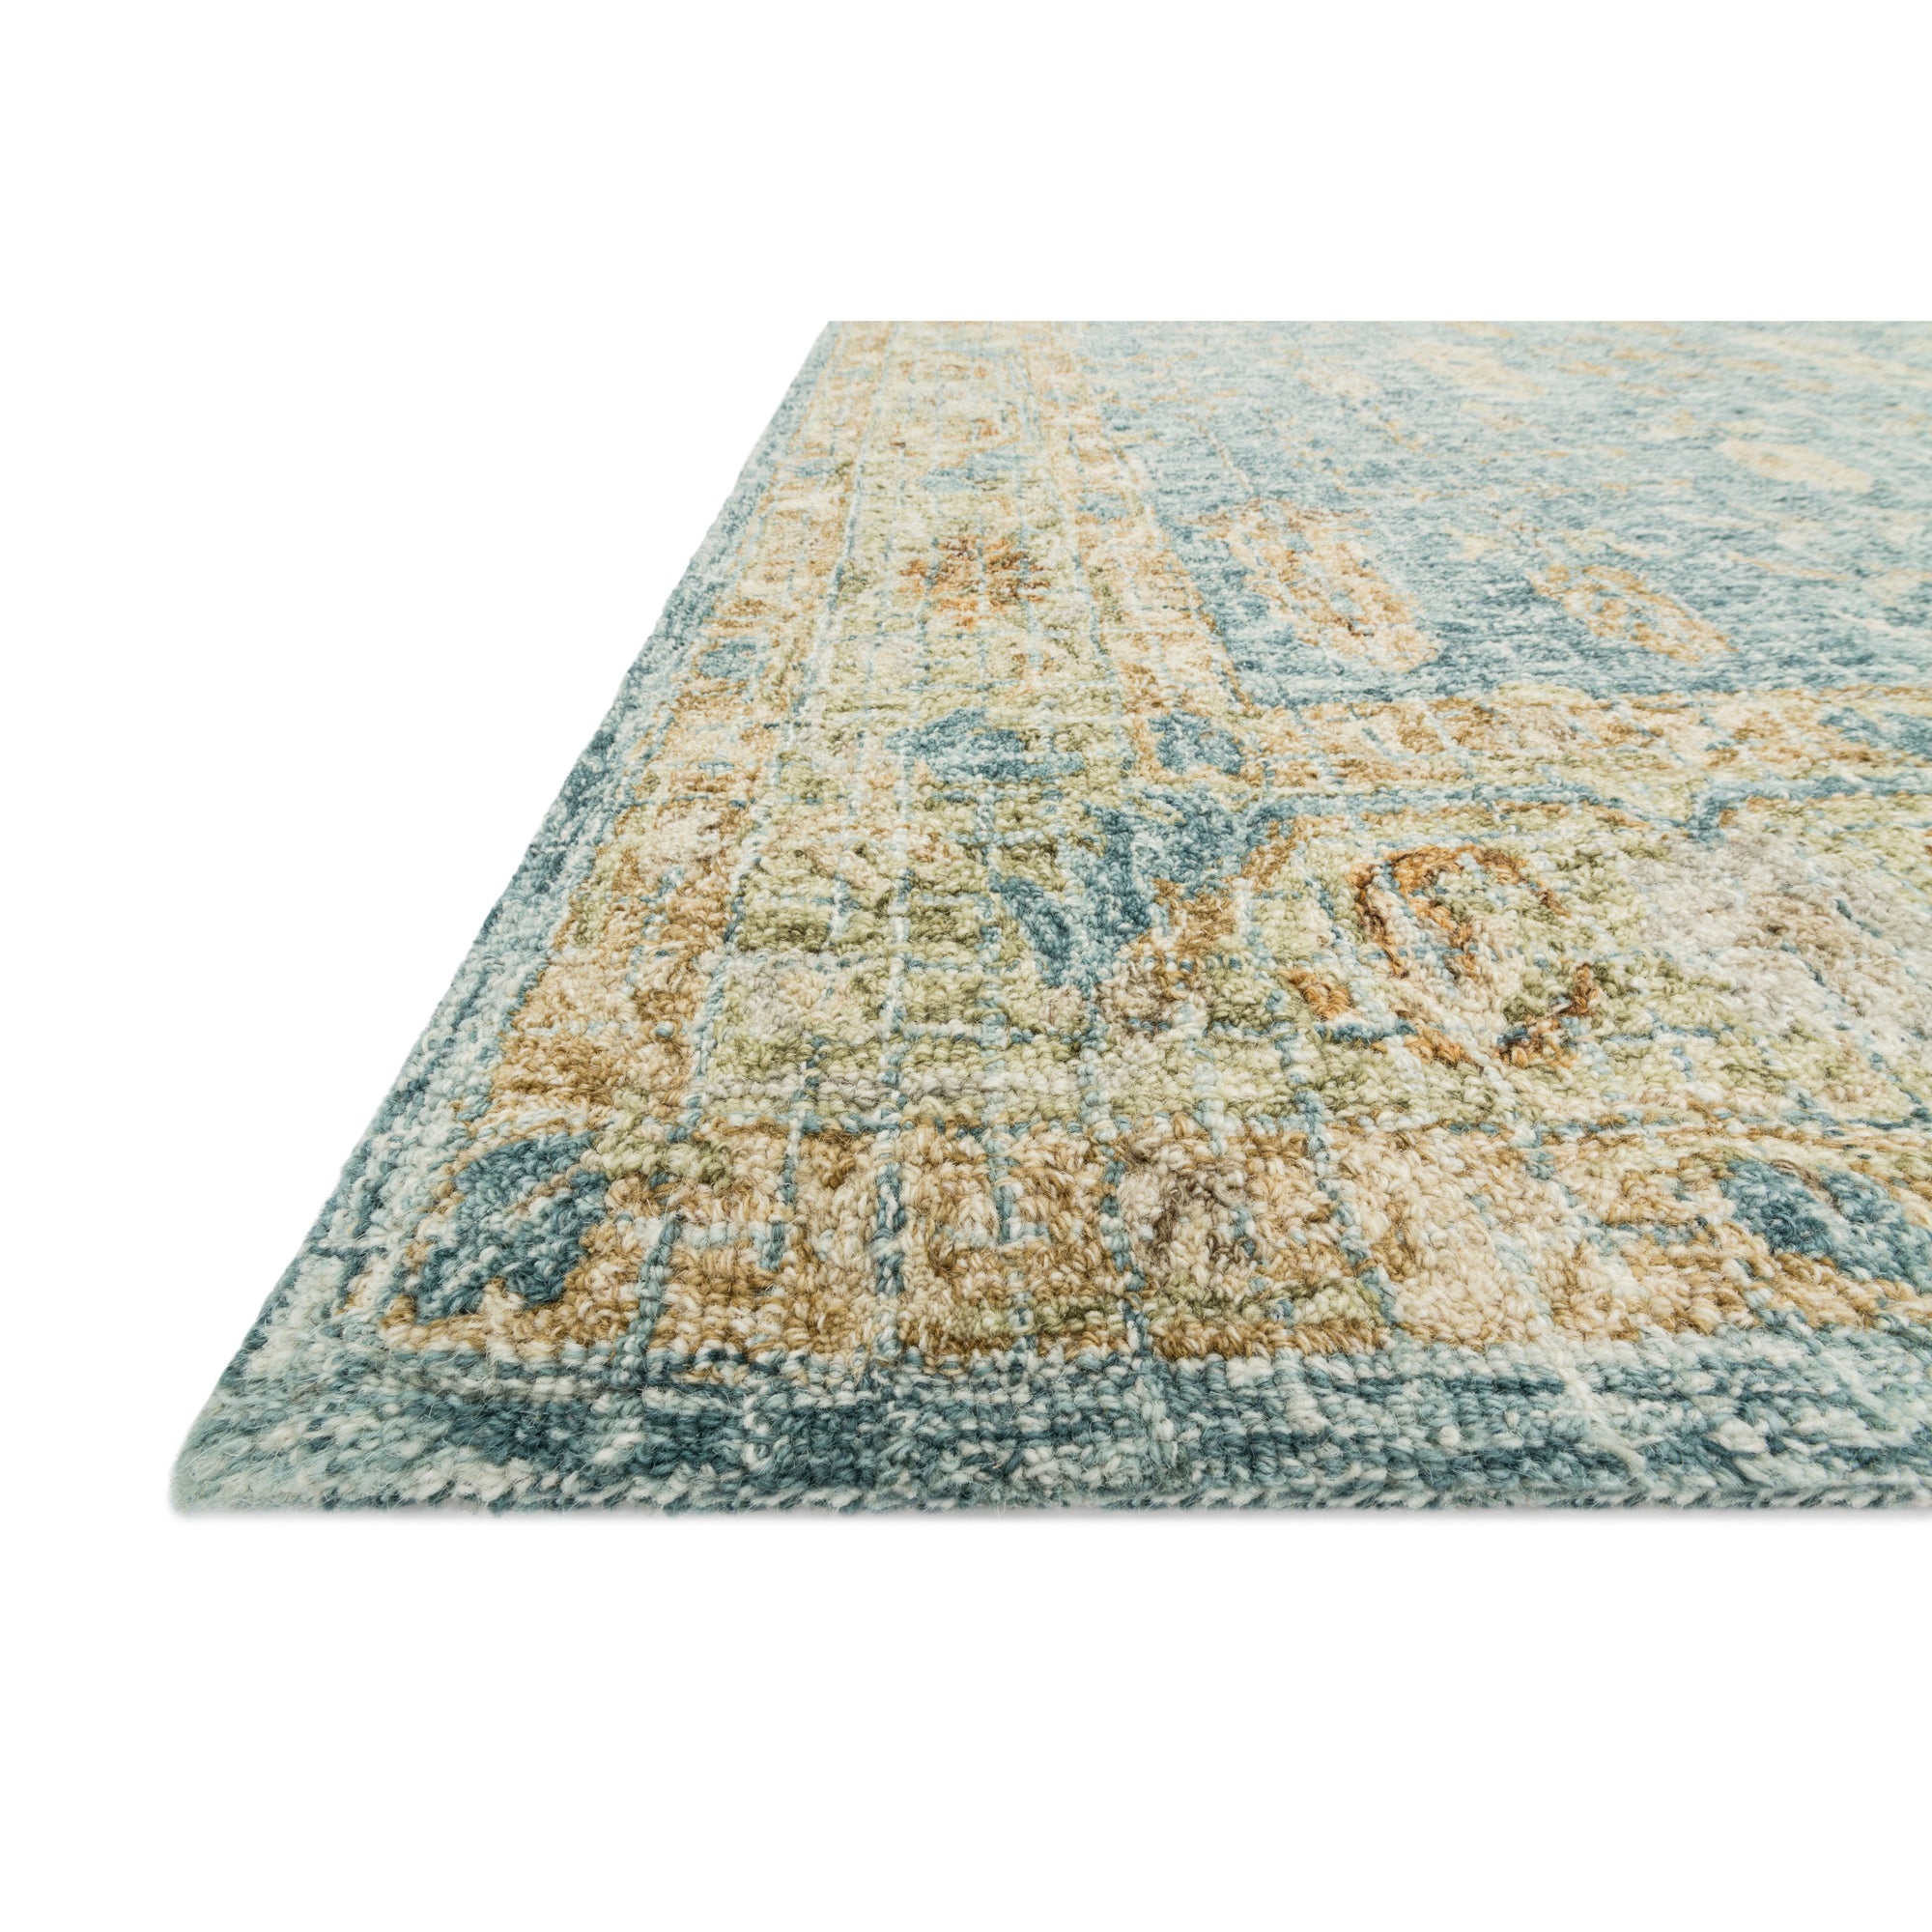 Rugs by Roo Loloi Julian Blue Gold Area Rug in size 18" x 18" Sample